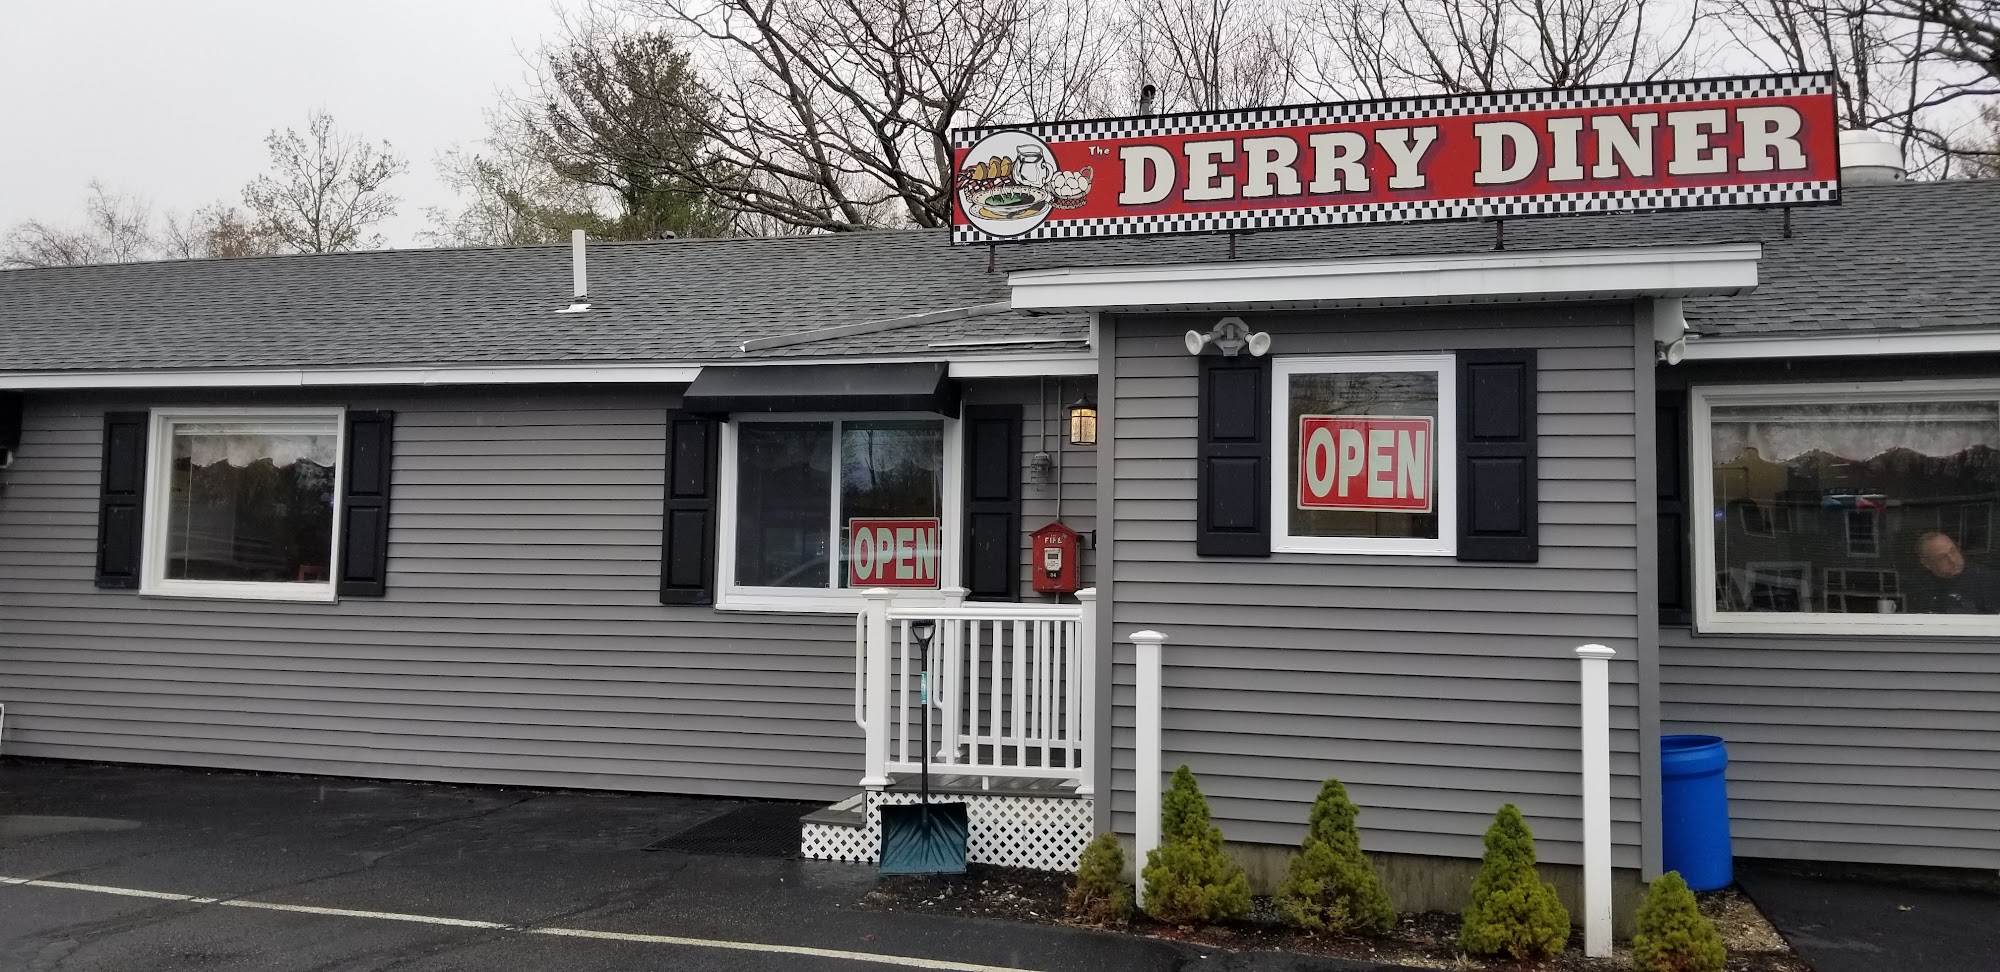 The Derry Diner